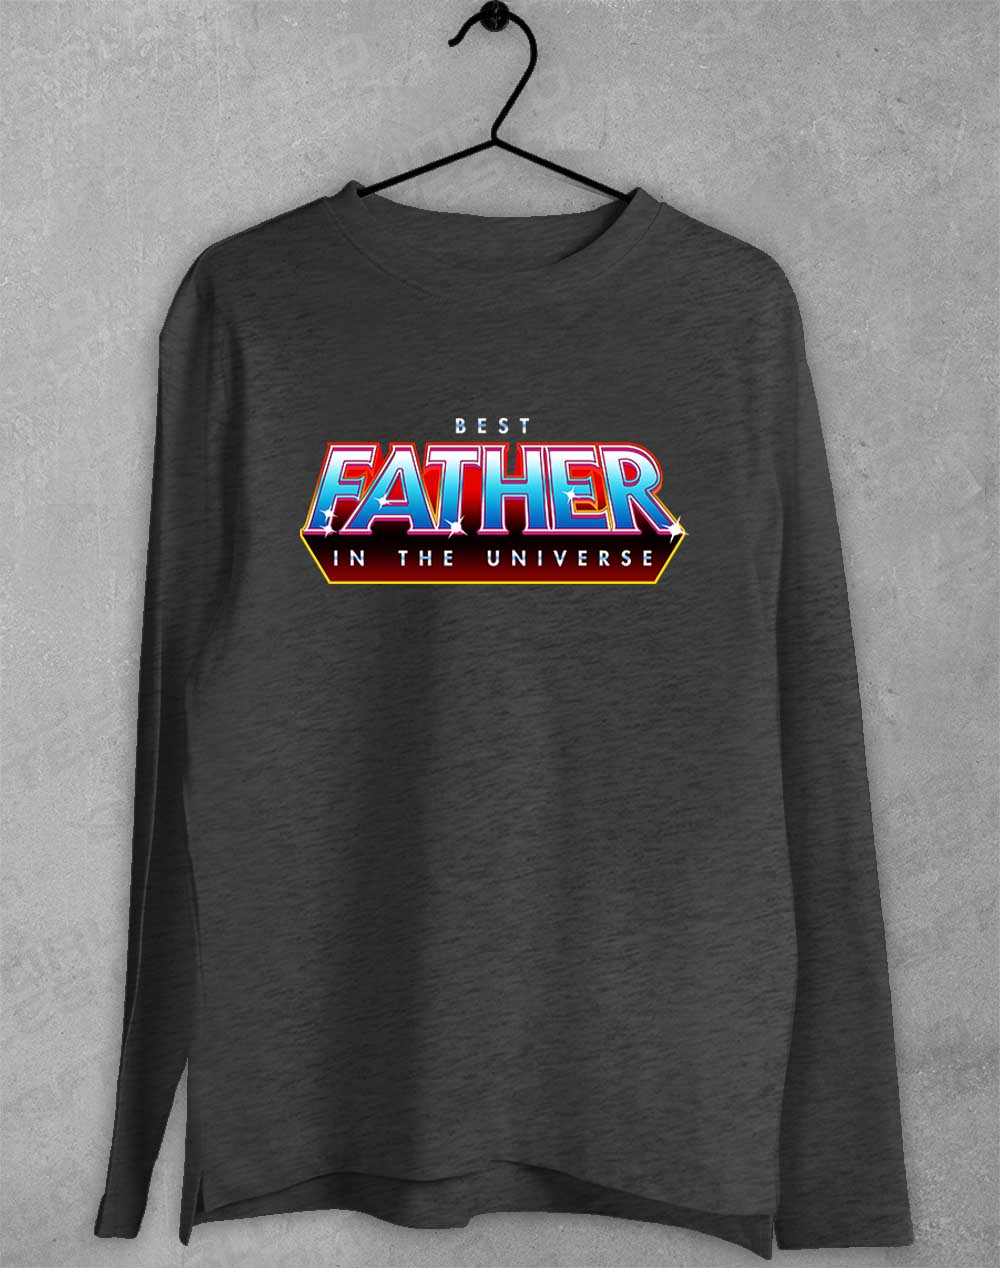 Dark Heather - Best Father in the Universe Long Sleeve T-Shirt